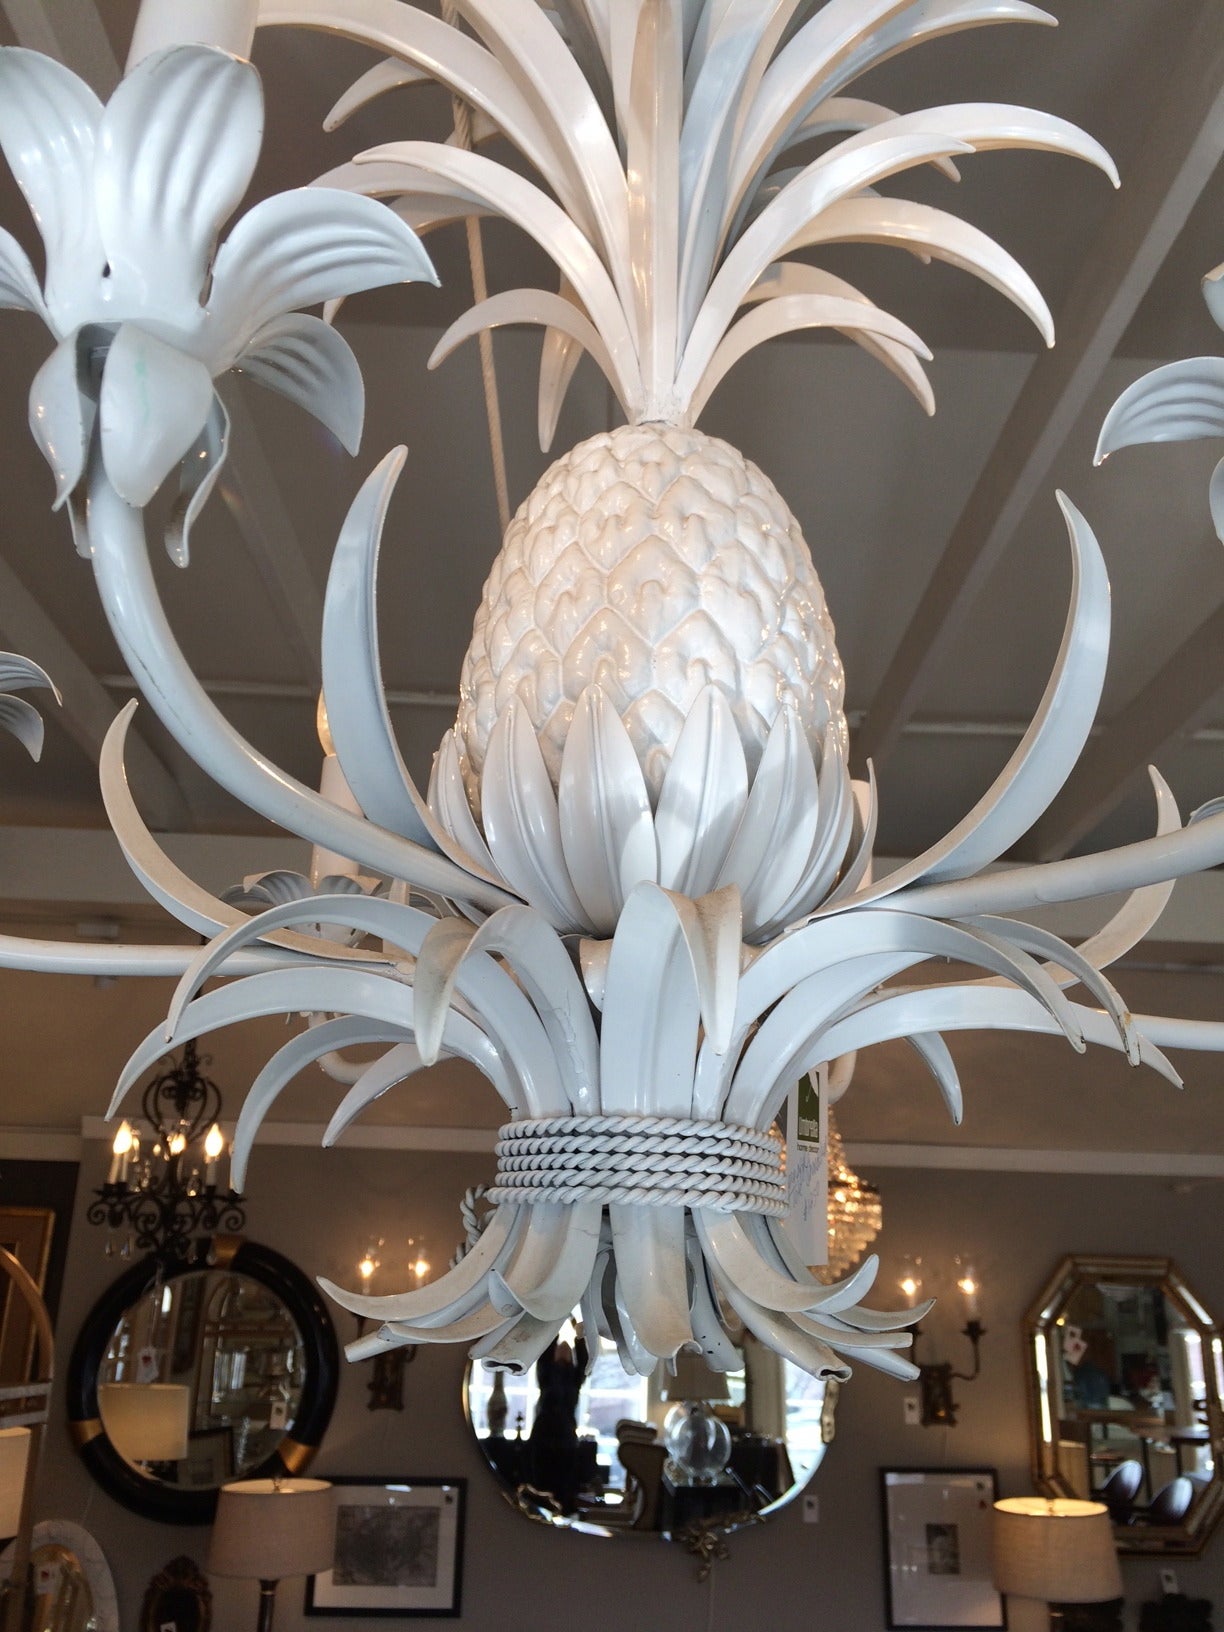 Vintage sophisticated tole chandelier with central pineapple and six arms, contemporized with shiny white paint.